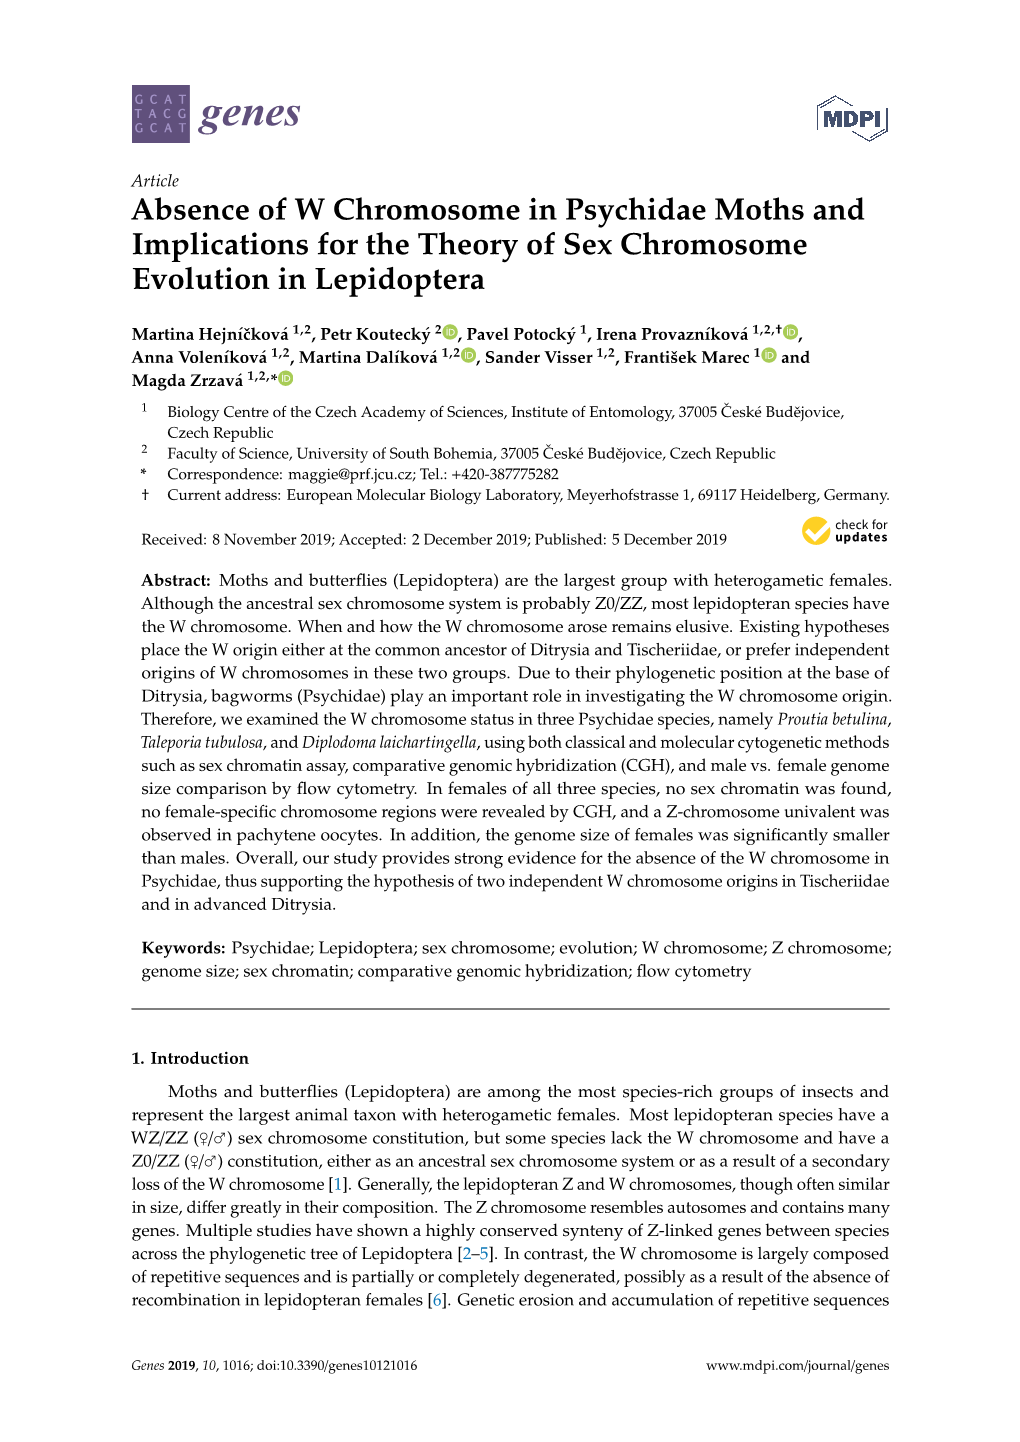 Absence of W Chromosome in Psychidae Moths and Implications for the Theory of Sex Chromosome Evolution in Lepidoptera